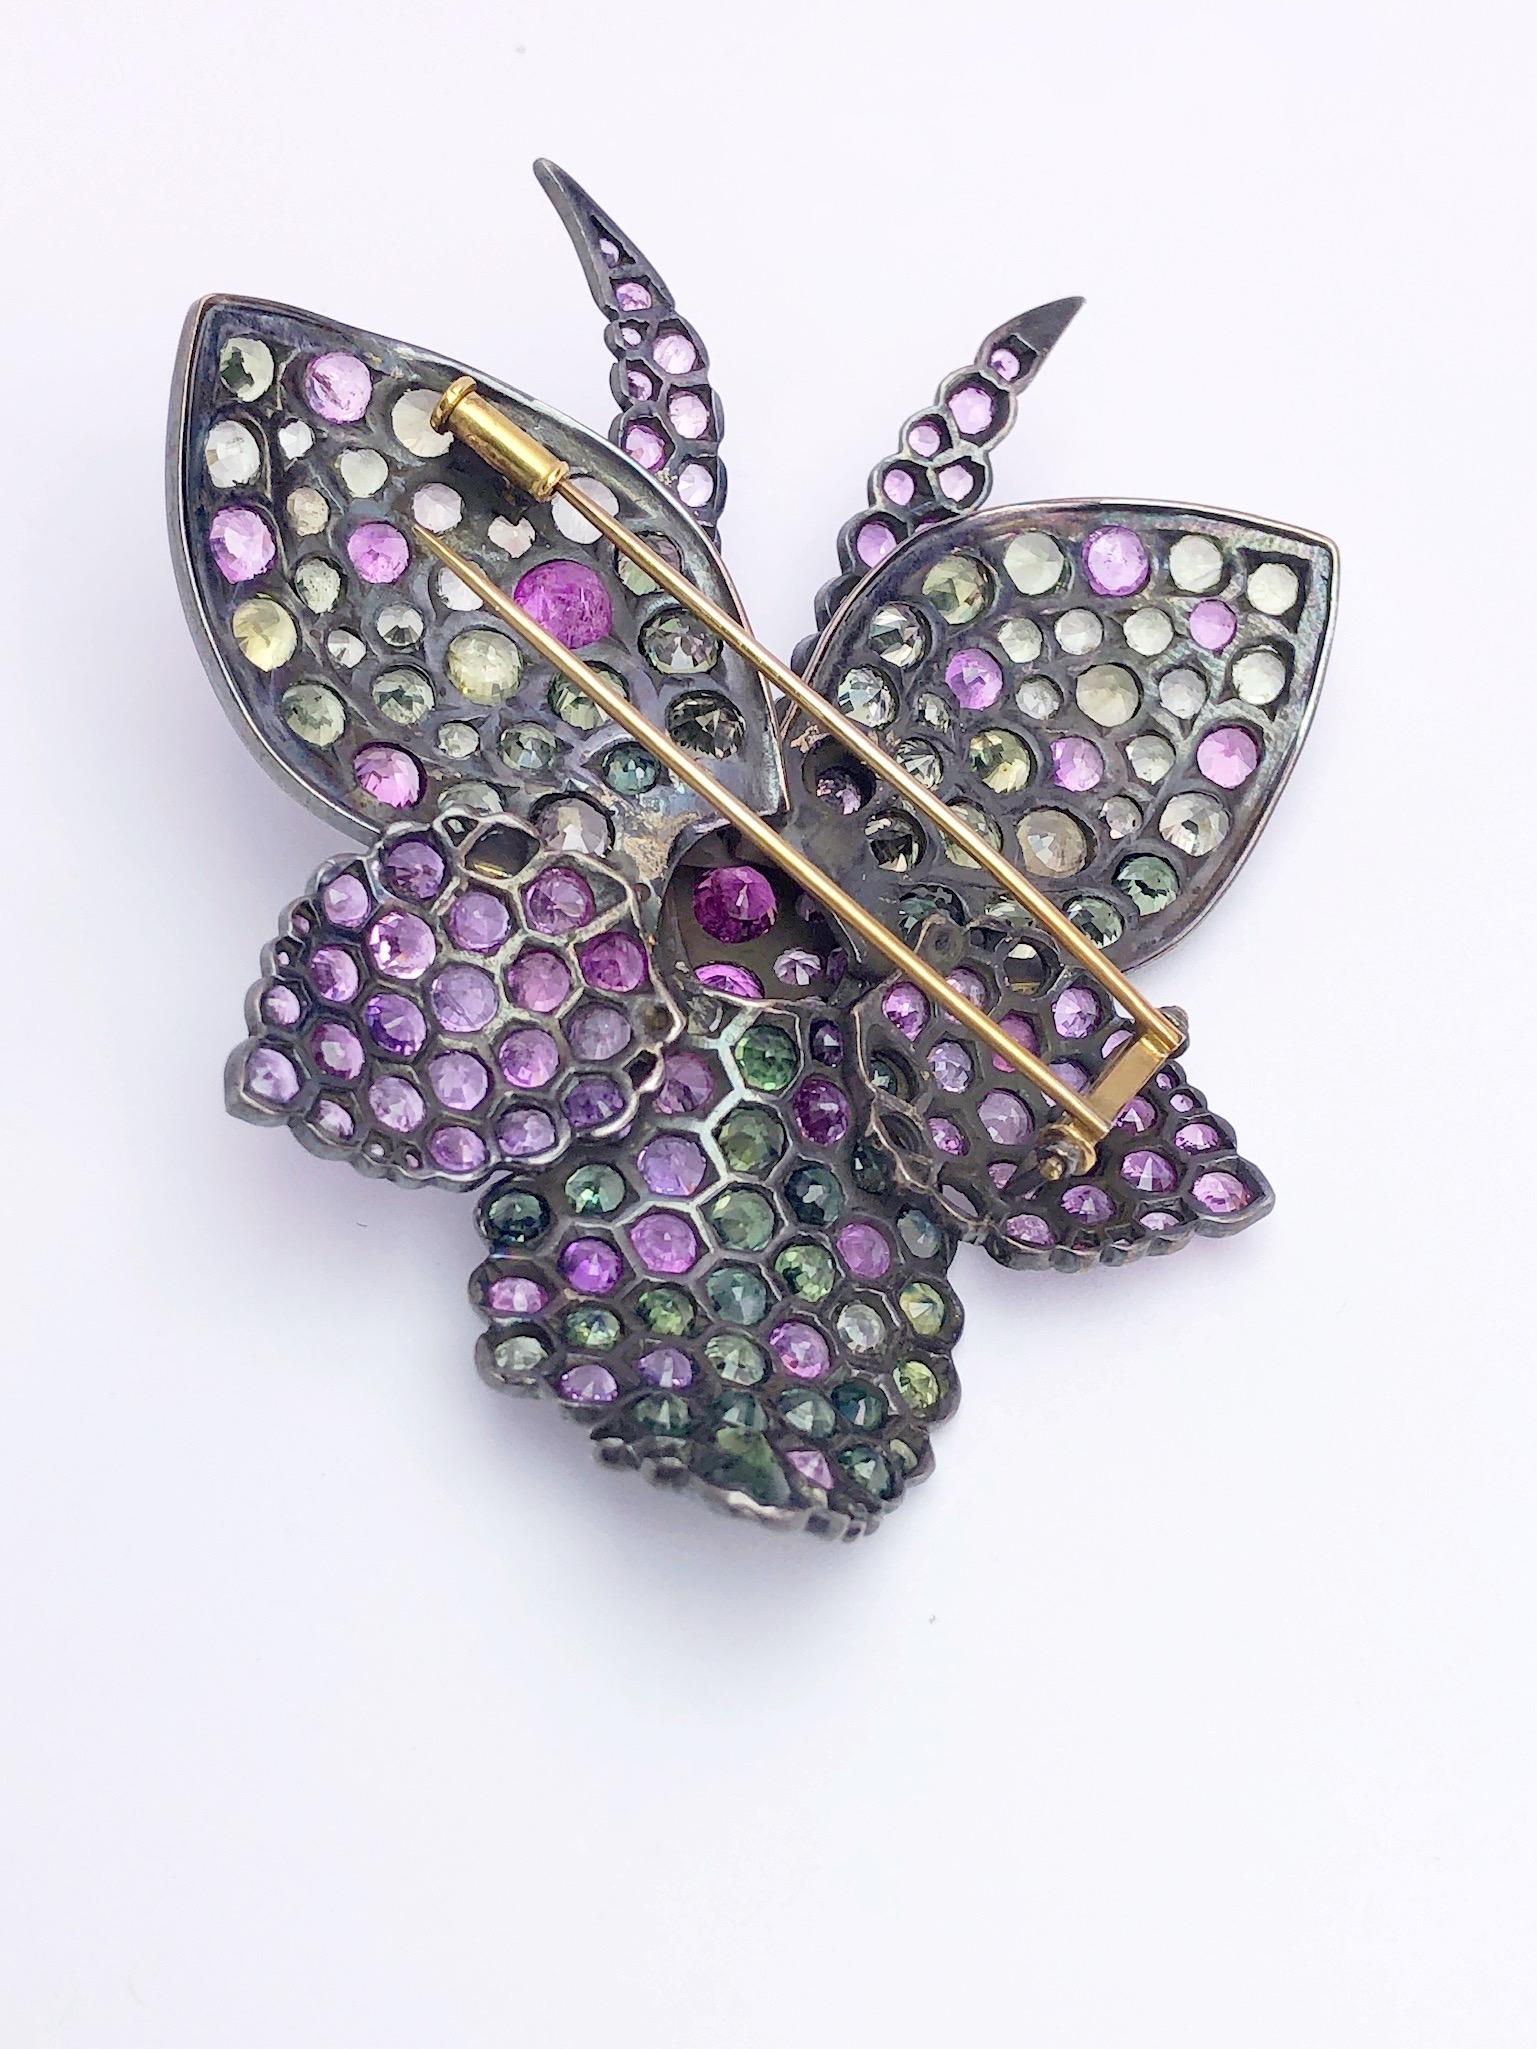 Retro Estate Silver and Gold Orchid Brooch with 34 Carat Fancy Colored Sapphires For Sale